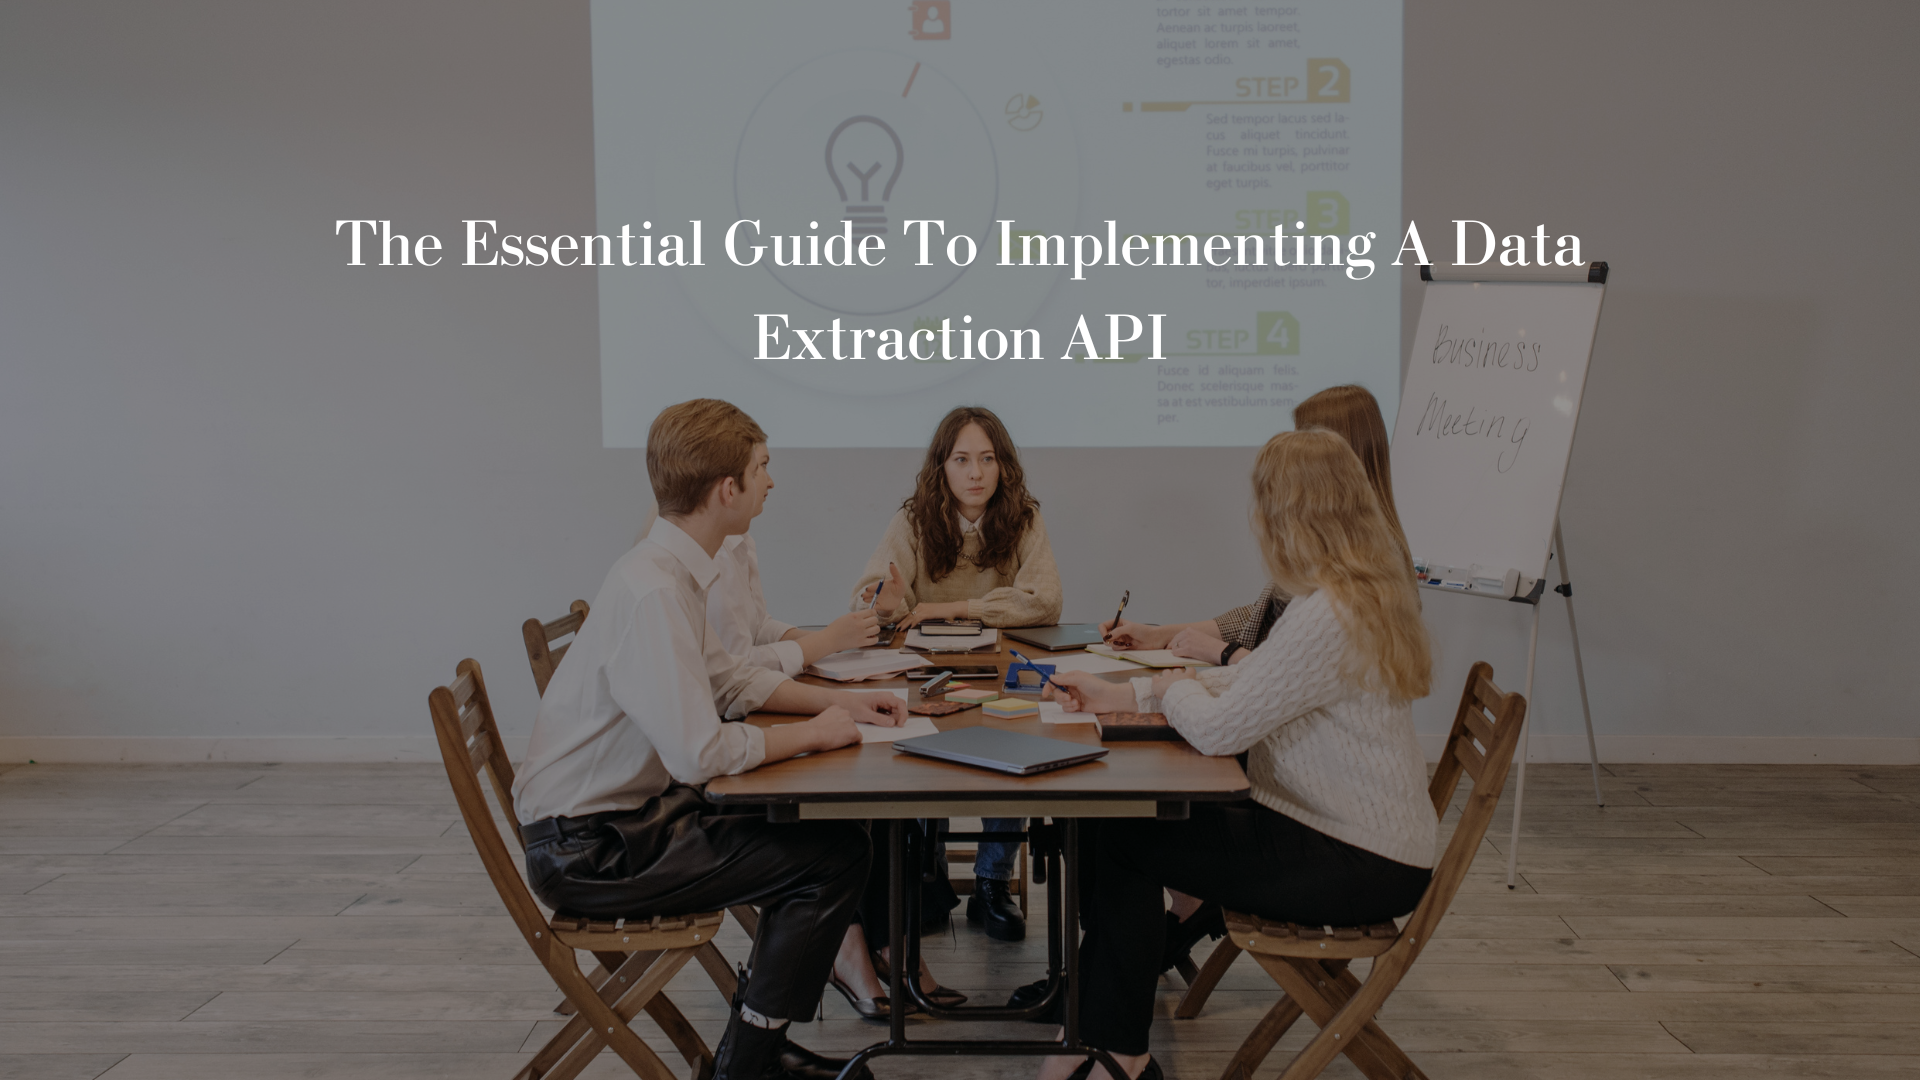 The Essential Guide To Implementing A Data Extraction API